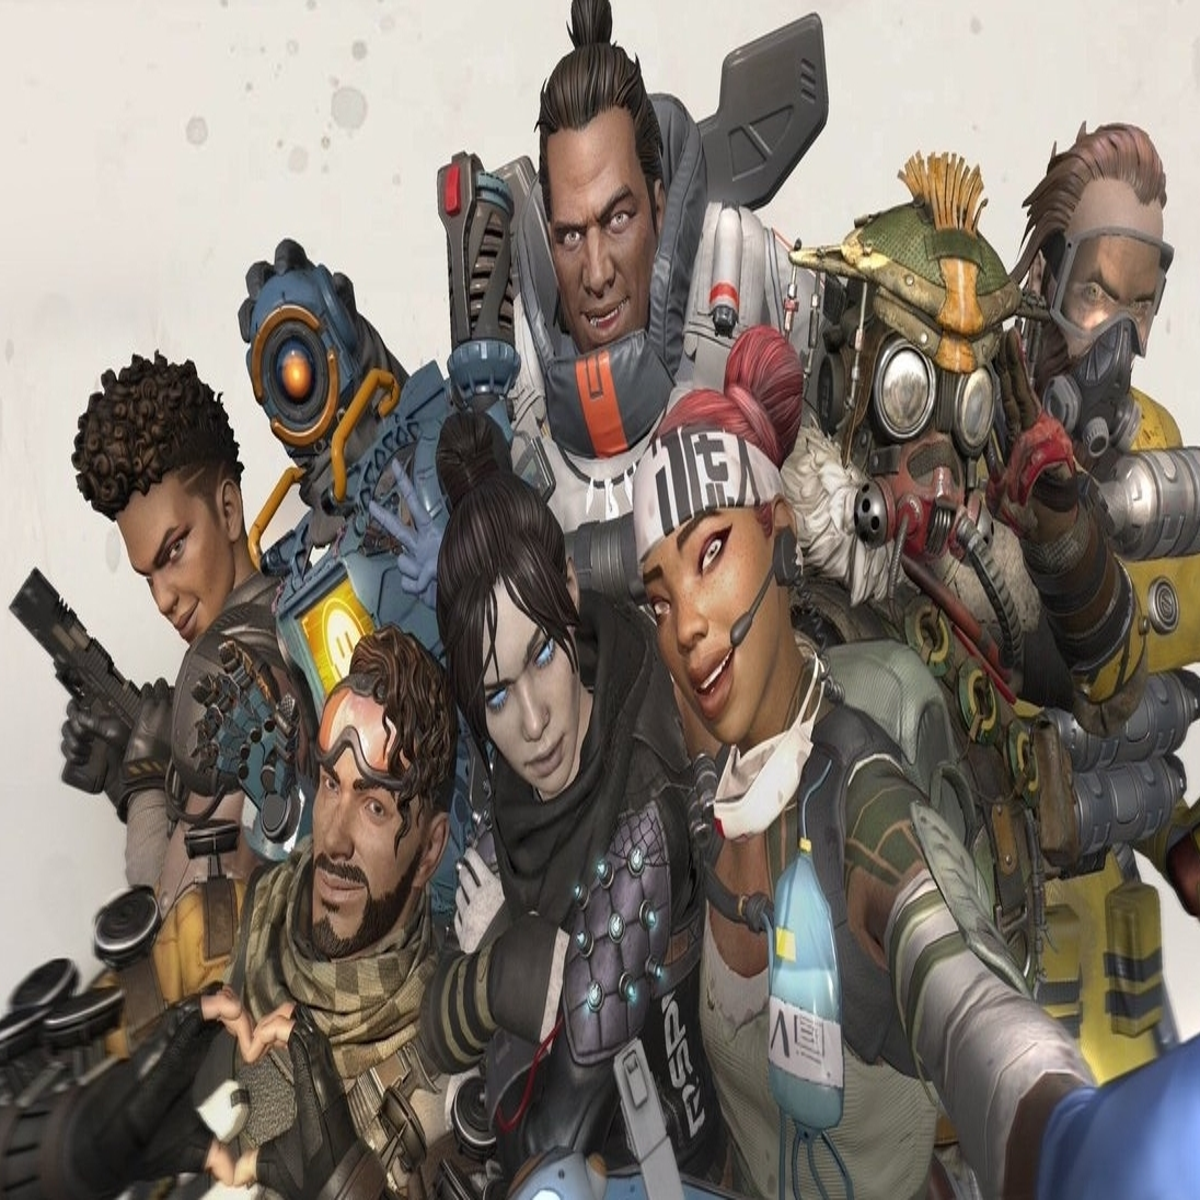 Apex Legends: The Titanfall battle royale game that lets you play your way  - CNET